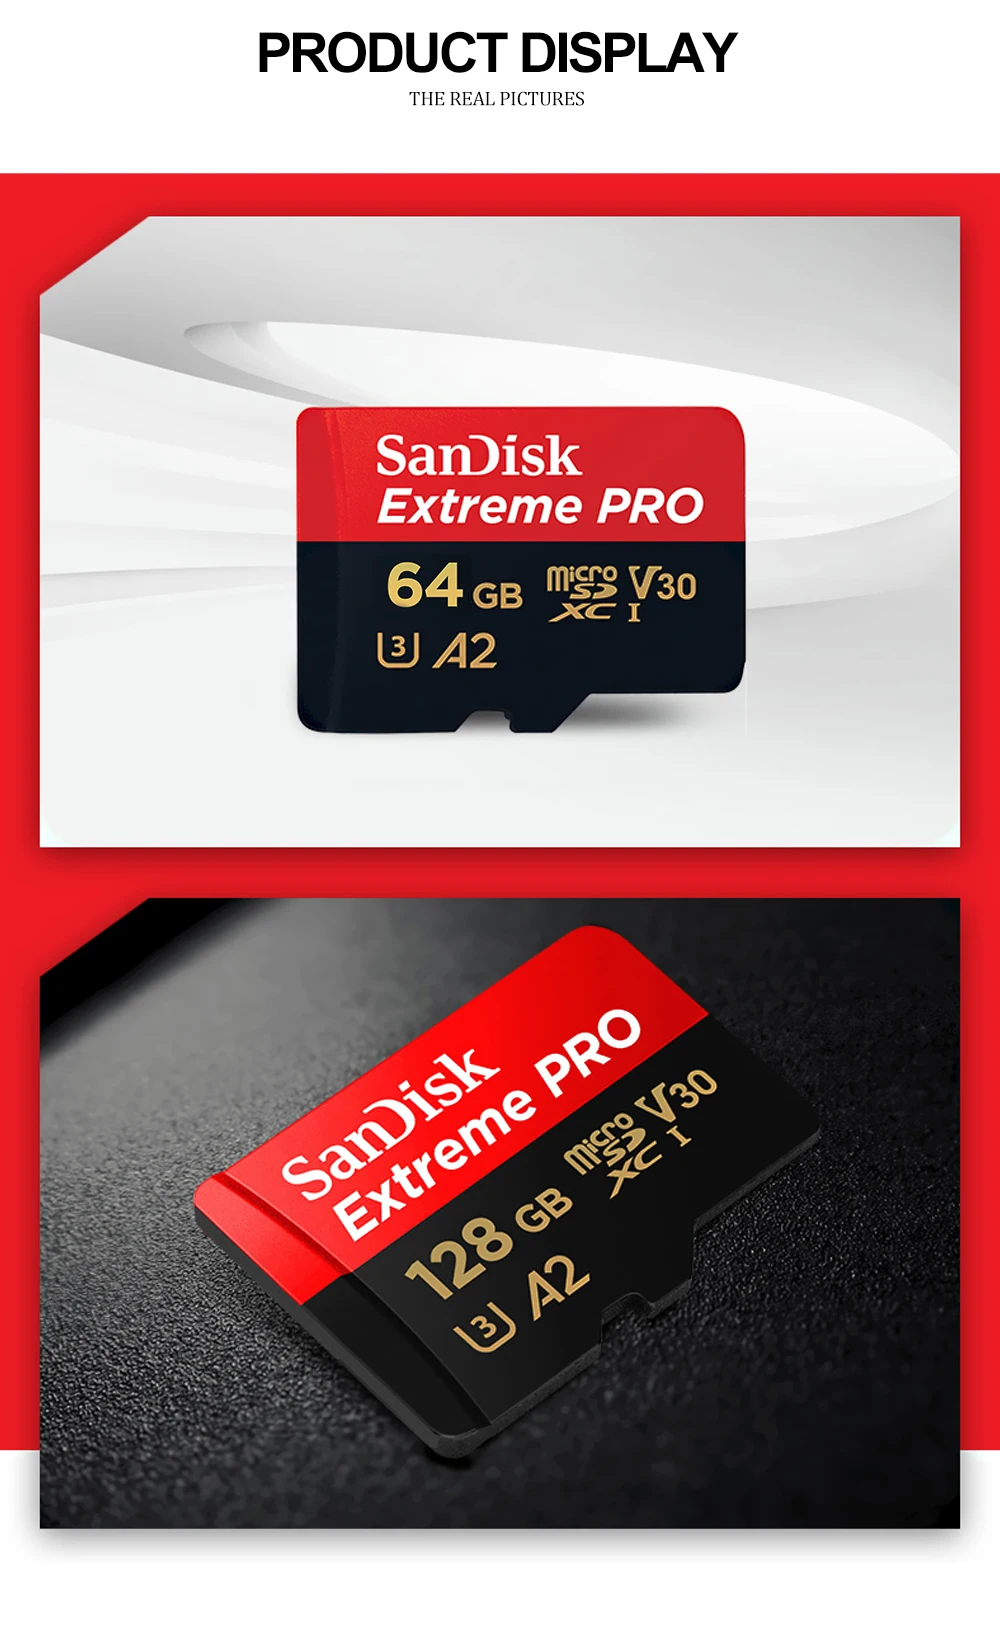 SanDisk Extreme PRO Micro SD Card 64GB 128GB 256GB A2 Flash Memory Cards High Speed up to 170MB/s microSDXC V30 U3 TF Cards sony memory card